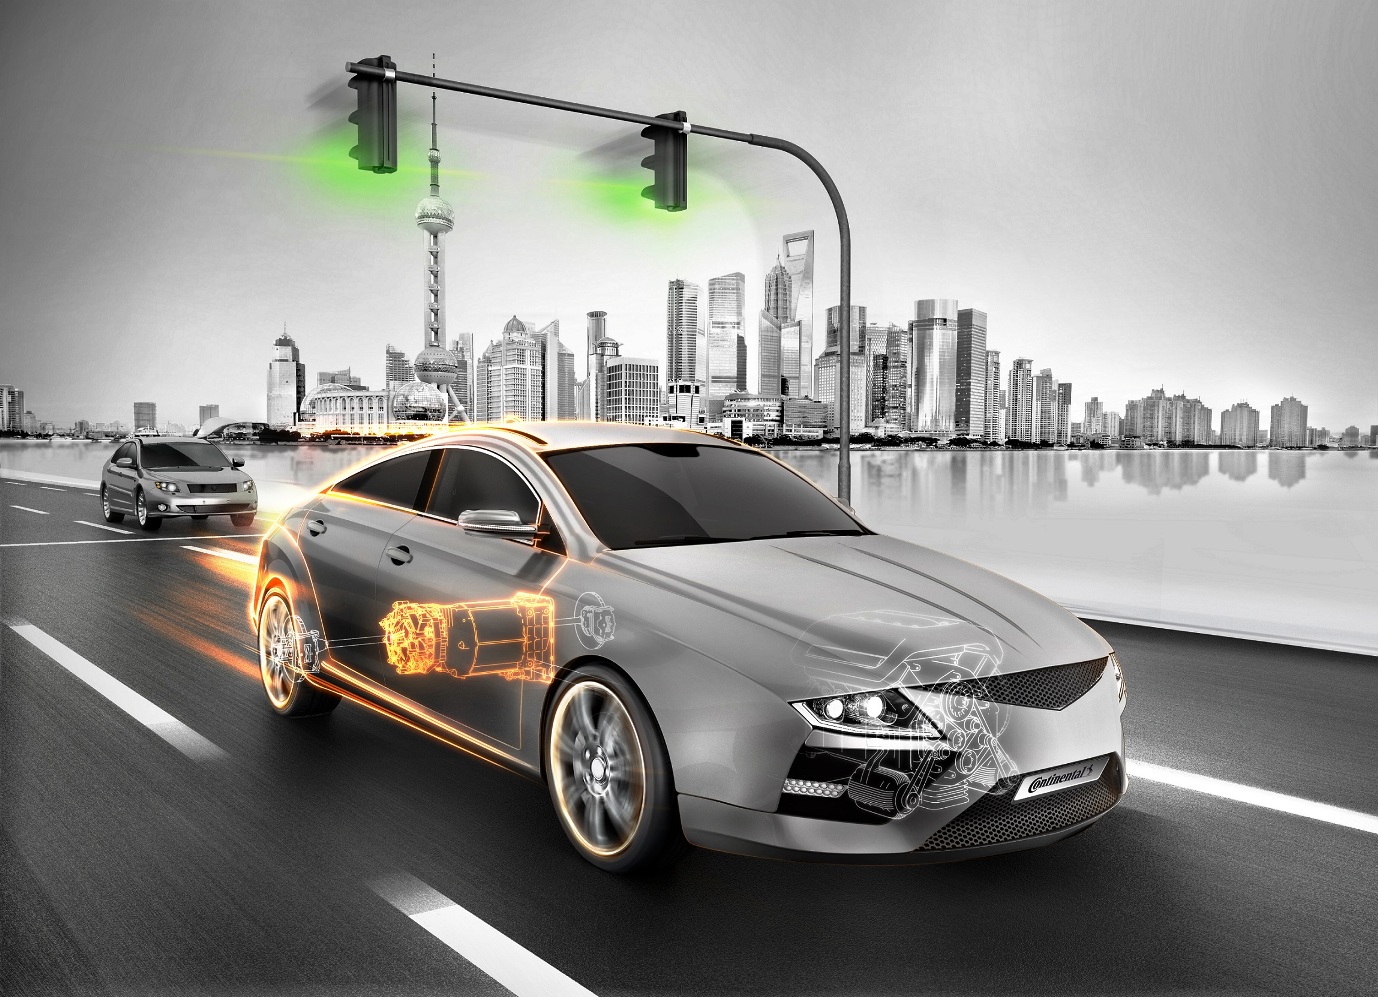 Continental Focuses on Efficient Combustion Engine Technologies